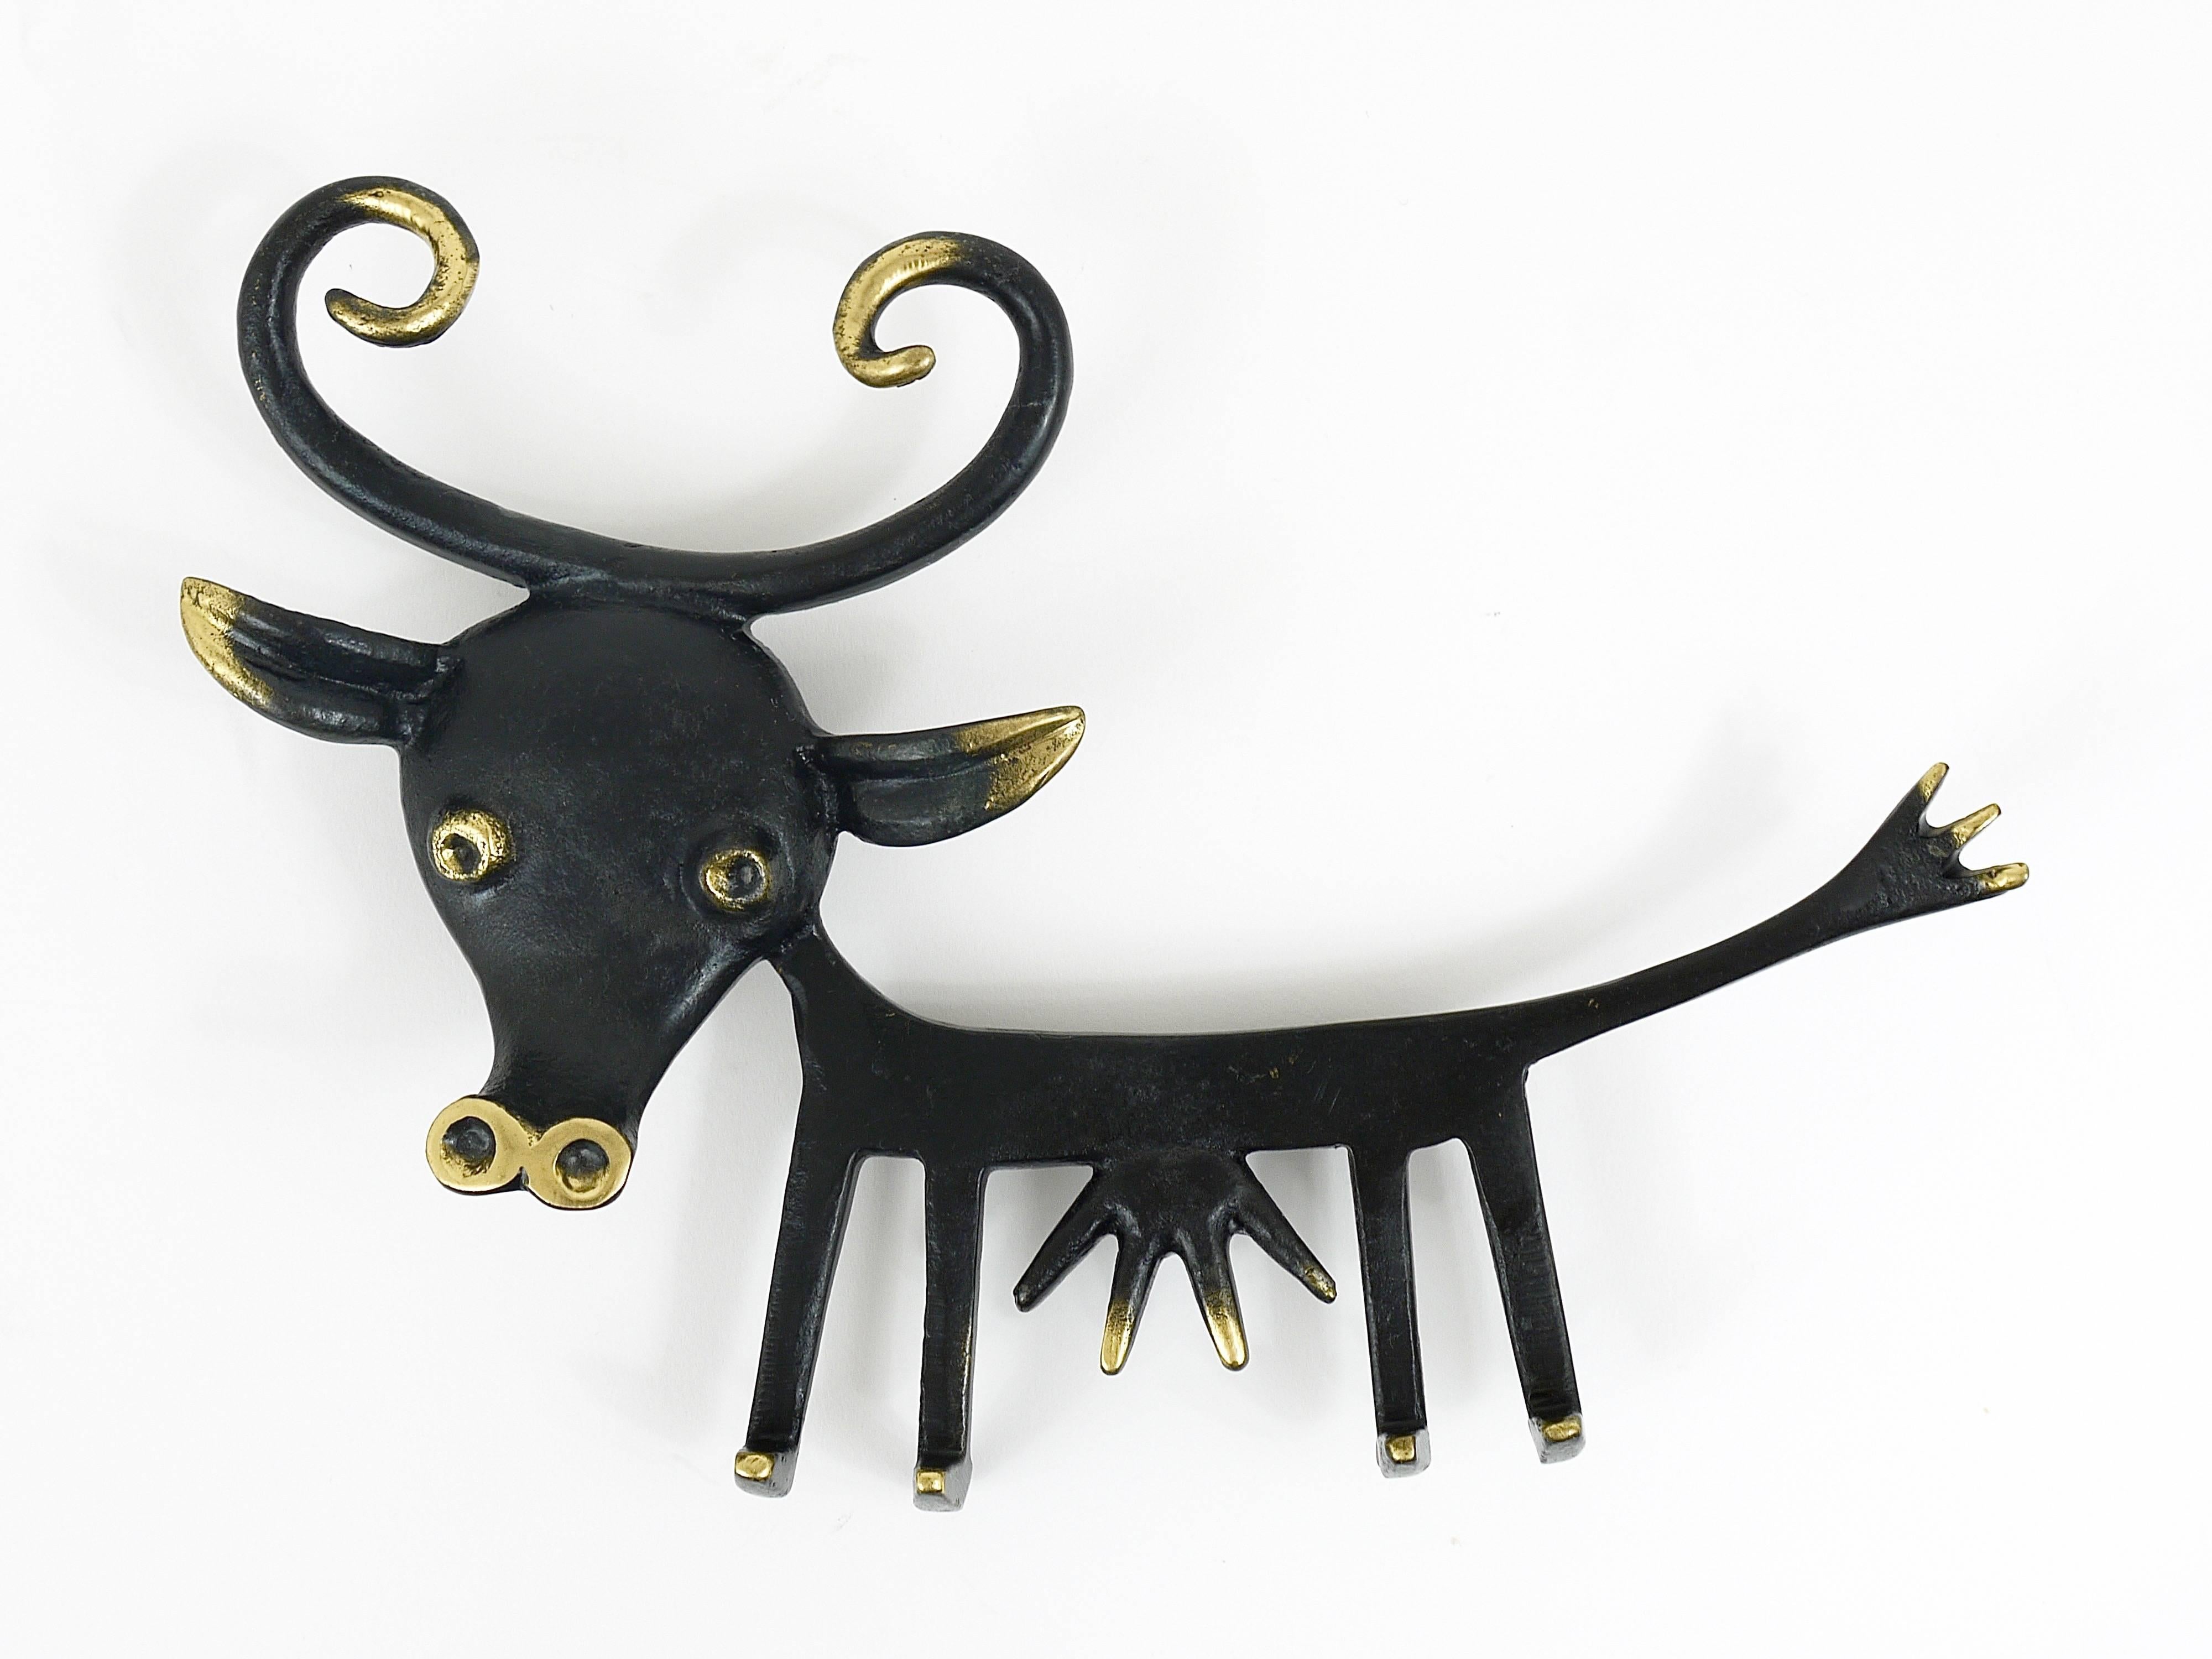 A charming and rare key holder, displaying a funny looking cow. Very large. A humorous design by Walter Bosse, executed by Herta Baller, Austria in the 1950s. Made of brass, in excellent condition.